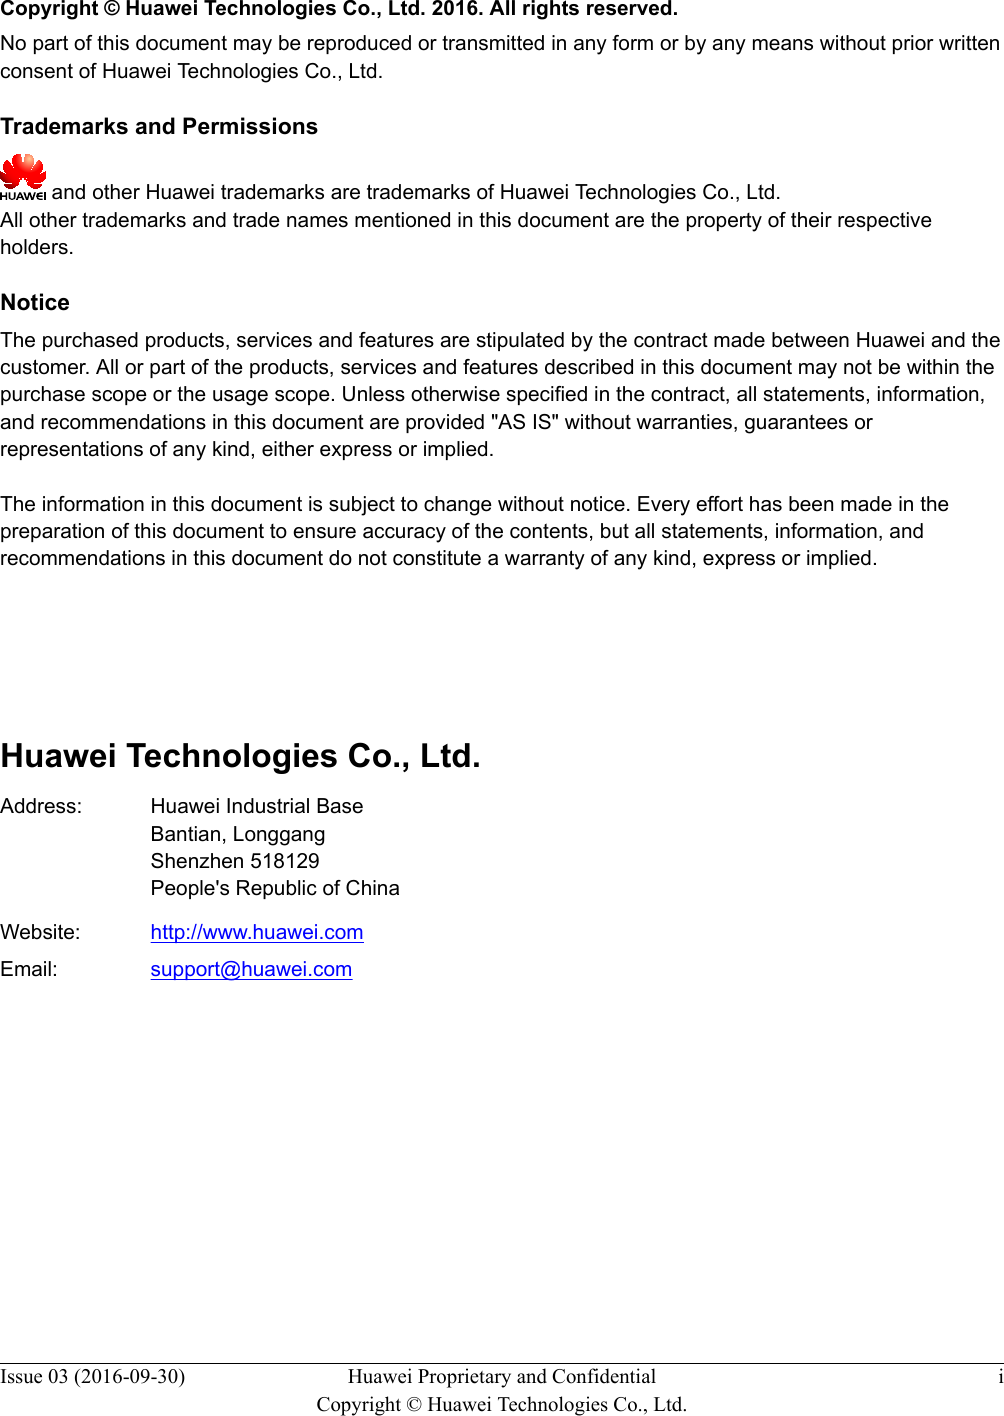   Copyright © Huawei Technologies Co., Ltd. 2016. All rights reserved.No part of this document may be reproduced or transmitted in any form or by any means without prior writtenconsent of Huawei Technologies Co., Ltd. Trademarks and Permissions and other Huawei trademarks are trademarks of Huawei Technologies Co., Ltd.All other trademarks and trade names mentioned in this document are the property of their respectiveholders. NoticeThe purchased products, services and features are stipulated by the contract made between Huawei and thecustomer. All or part of the products, services and features described in this document may not be within thepurchase scope or the usage scope. Unless otherwise specified in the contract, all statements, information,and recommendations in this document are provided &quot;AS IS&quot; without warranties, guarantees orrepresentations of any kind, either express or implied.The information in this document is subject to change without notice. Every effort has been made in thepreparation of this document to ensure accuracy of the contents, but all statements, information, andrecommendations in this document do not constitute a warranty of any kind, express or implied.        Huawei Technologies Co., Ltd.Address: Huawei Industrial BaseBantian, LonggangShenzhen 518129People&apos;s Republic of ChinaWebsite: http://www.huawei.comEmail: support@huawei.comIssue 03 (2016-09-30) Huawei Proprietary and ConfidentialCopyright © Huawei Technologies Co., Ltd.i